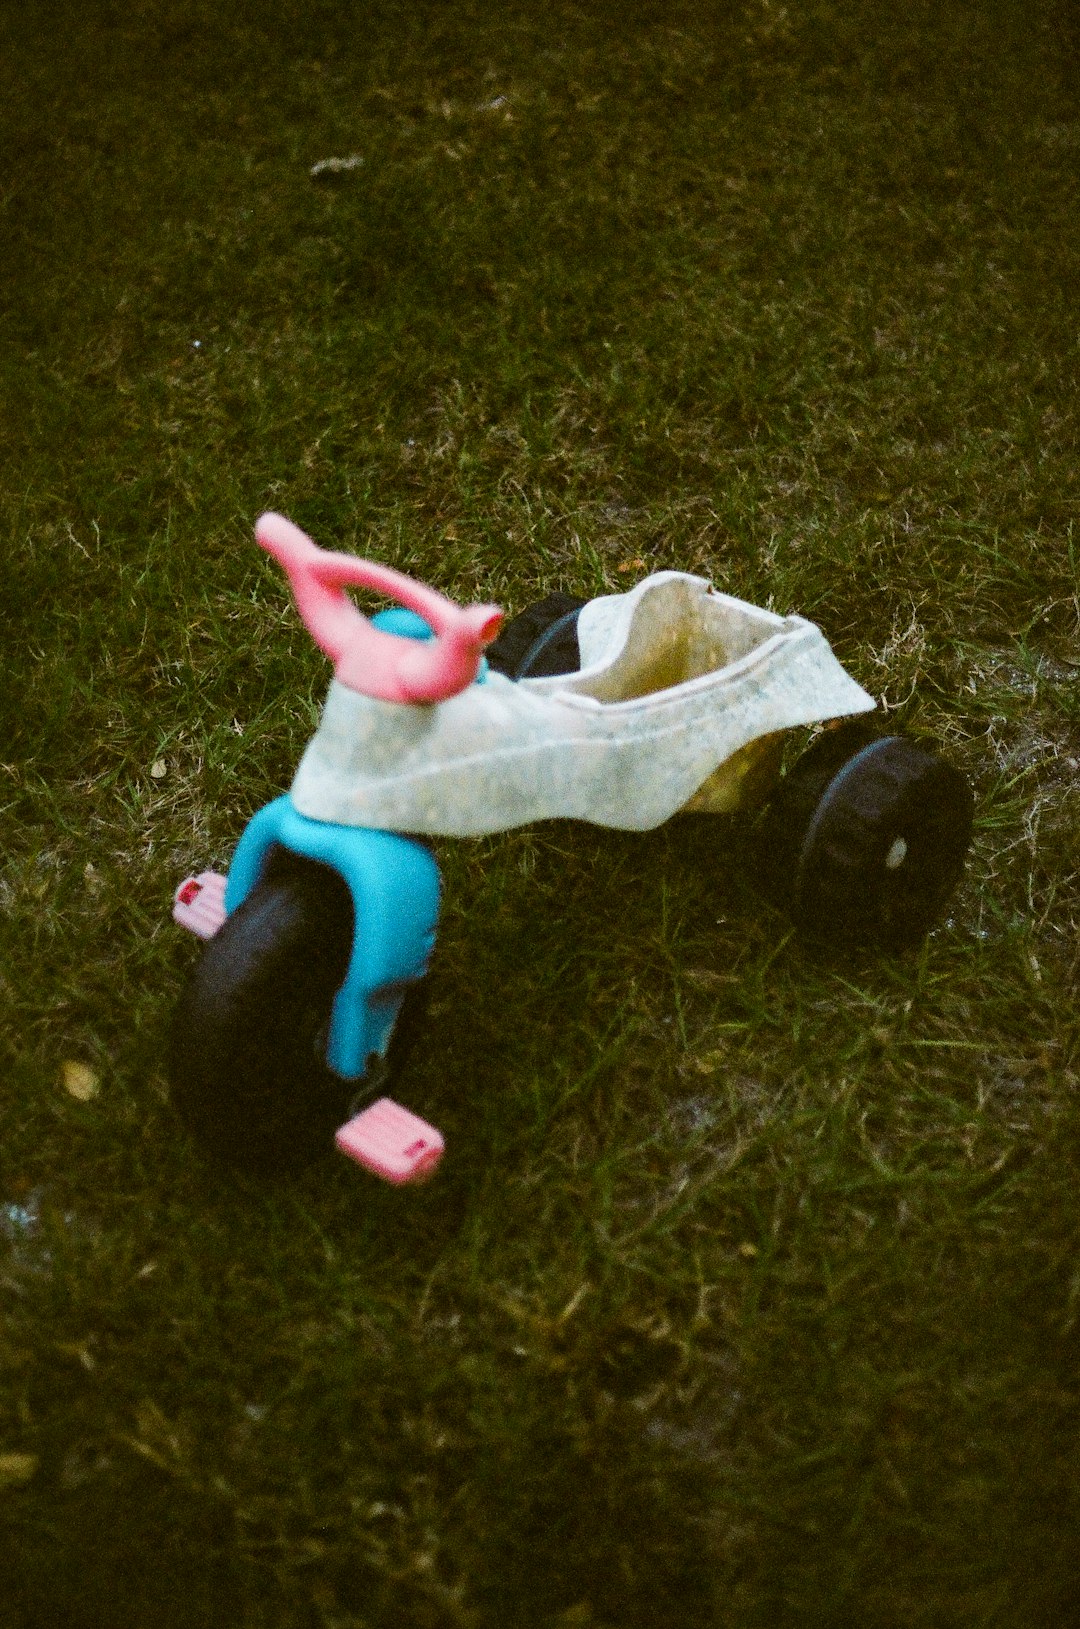 pink and blue plastic toy on green grass